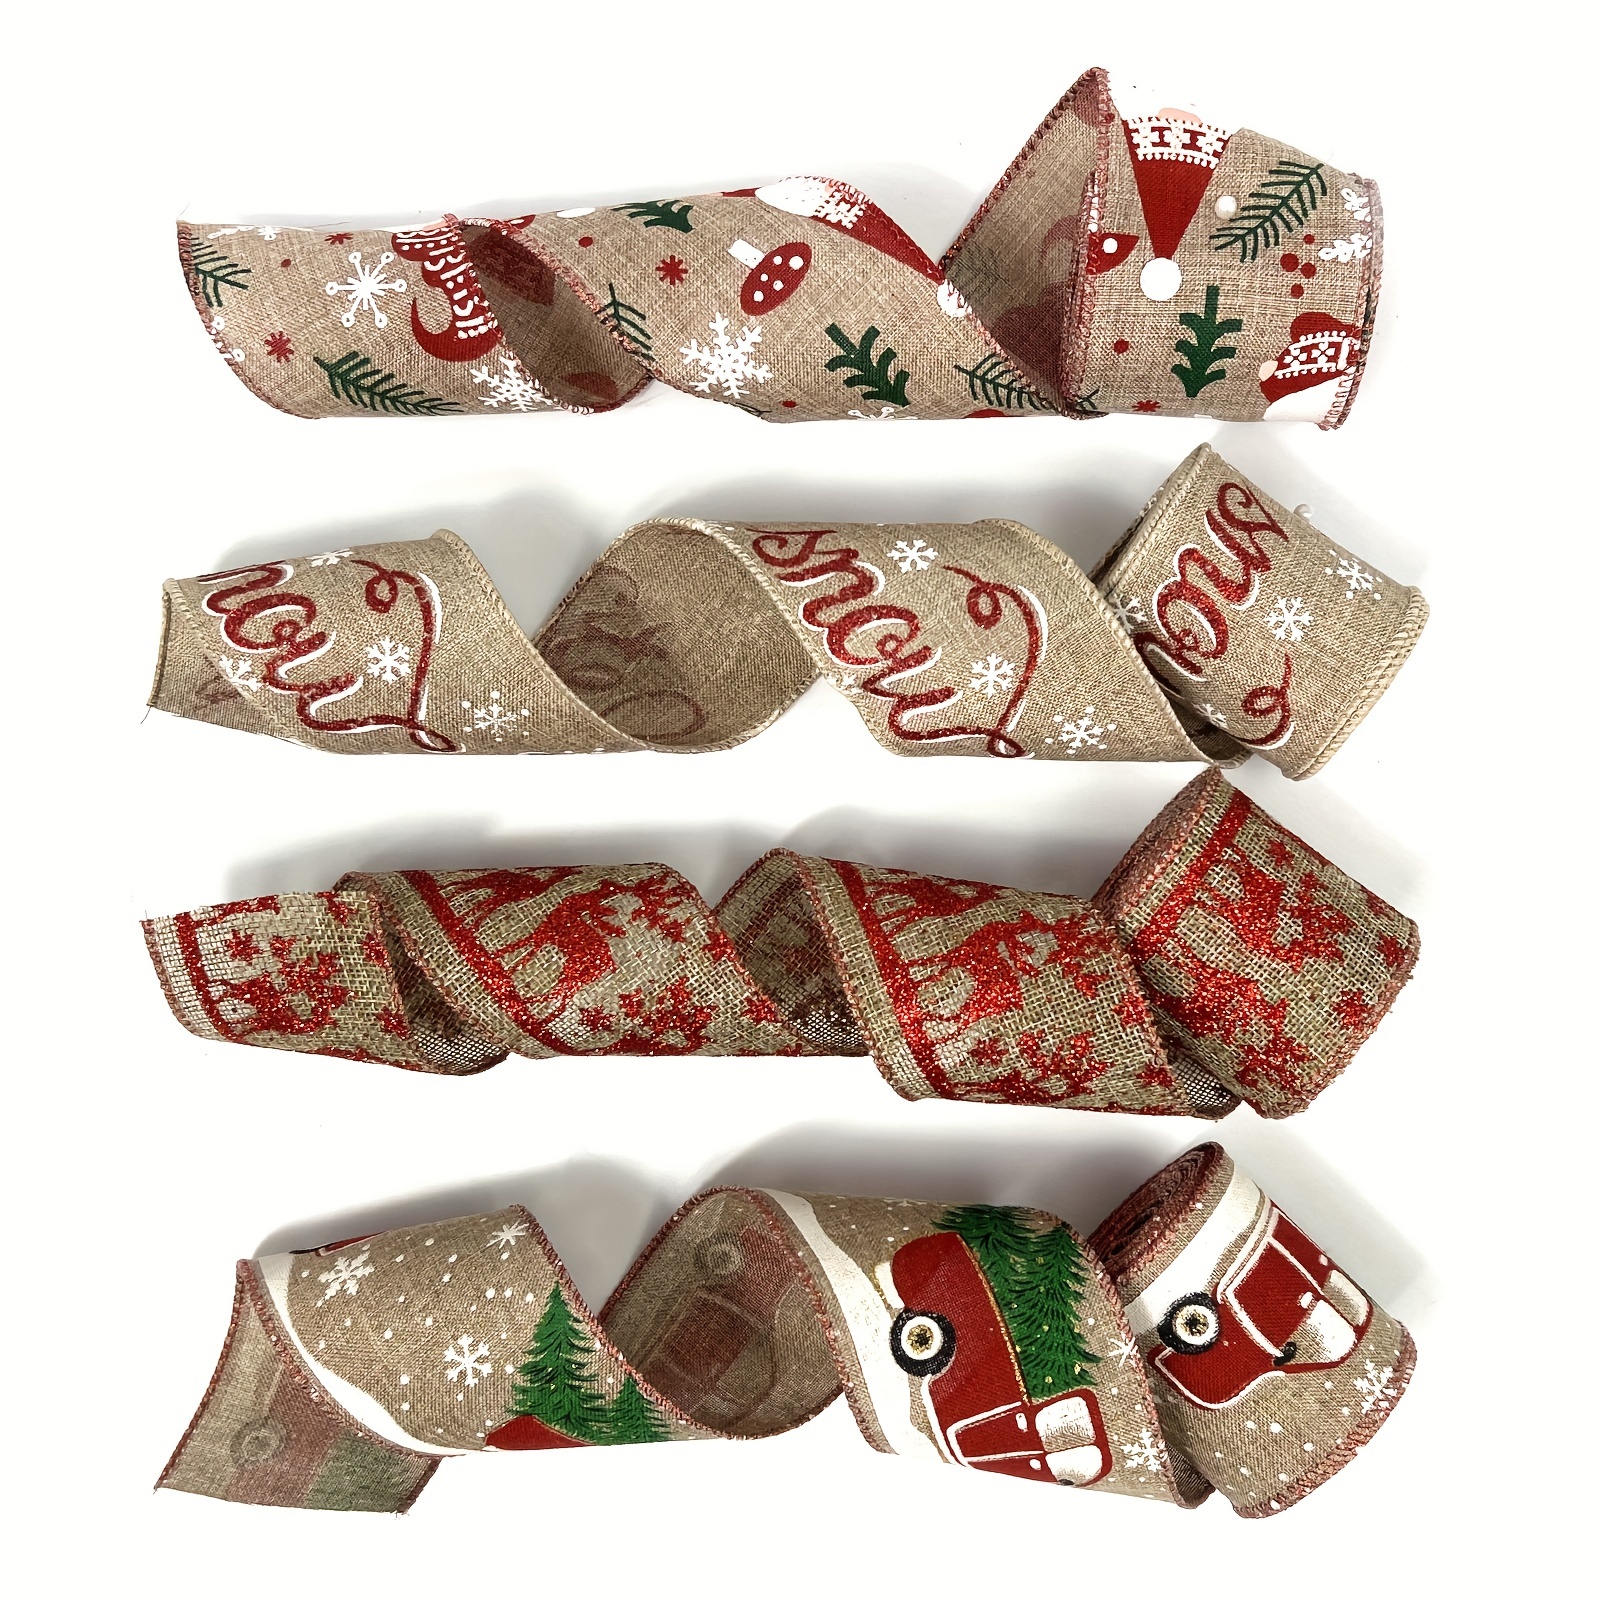 4 Rolls Christmas Wired Edge Ribbons, 5 Yards 2.5 Inches Plaid Ribbon for Craft Christmas Tree Truck Ribbon Deer Burlap Ribbon for Xmas Holiday Decor